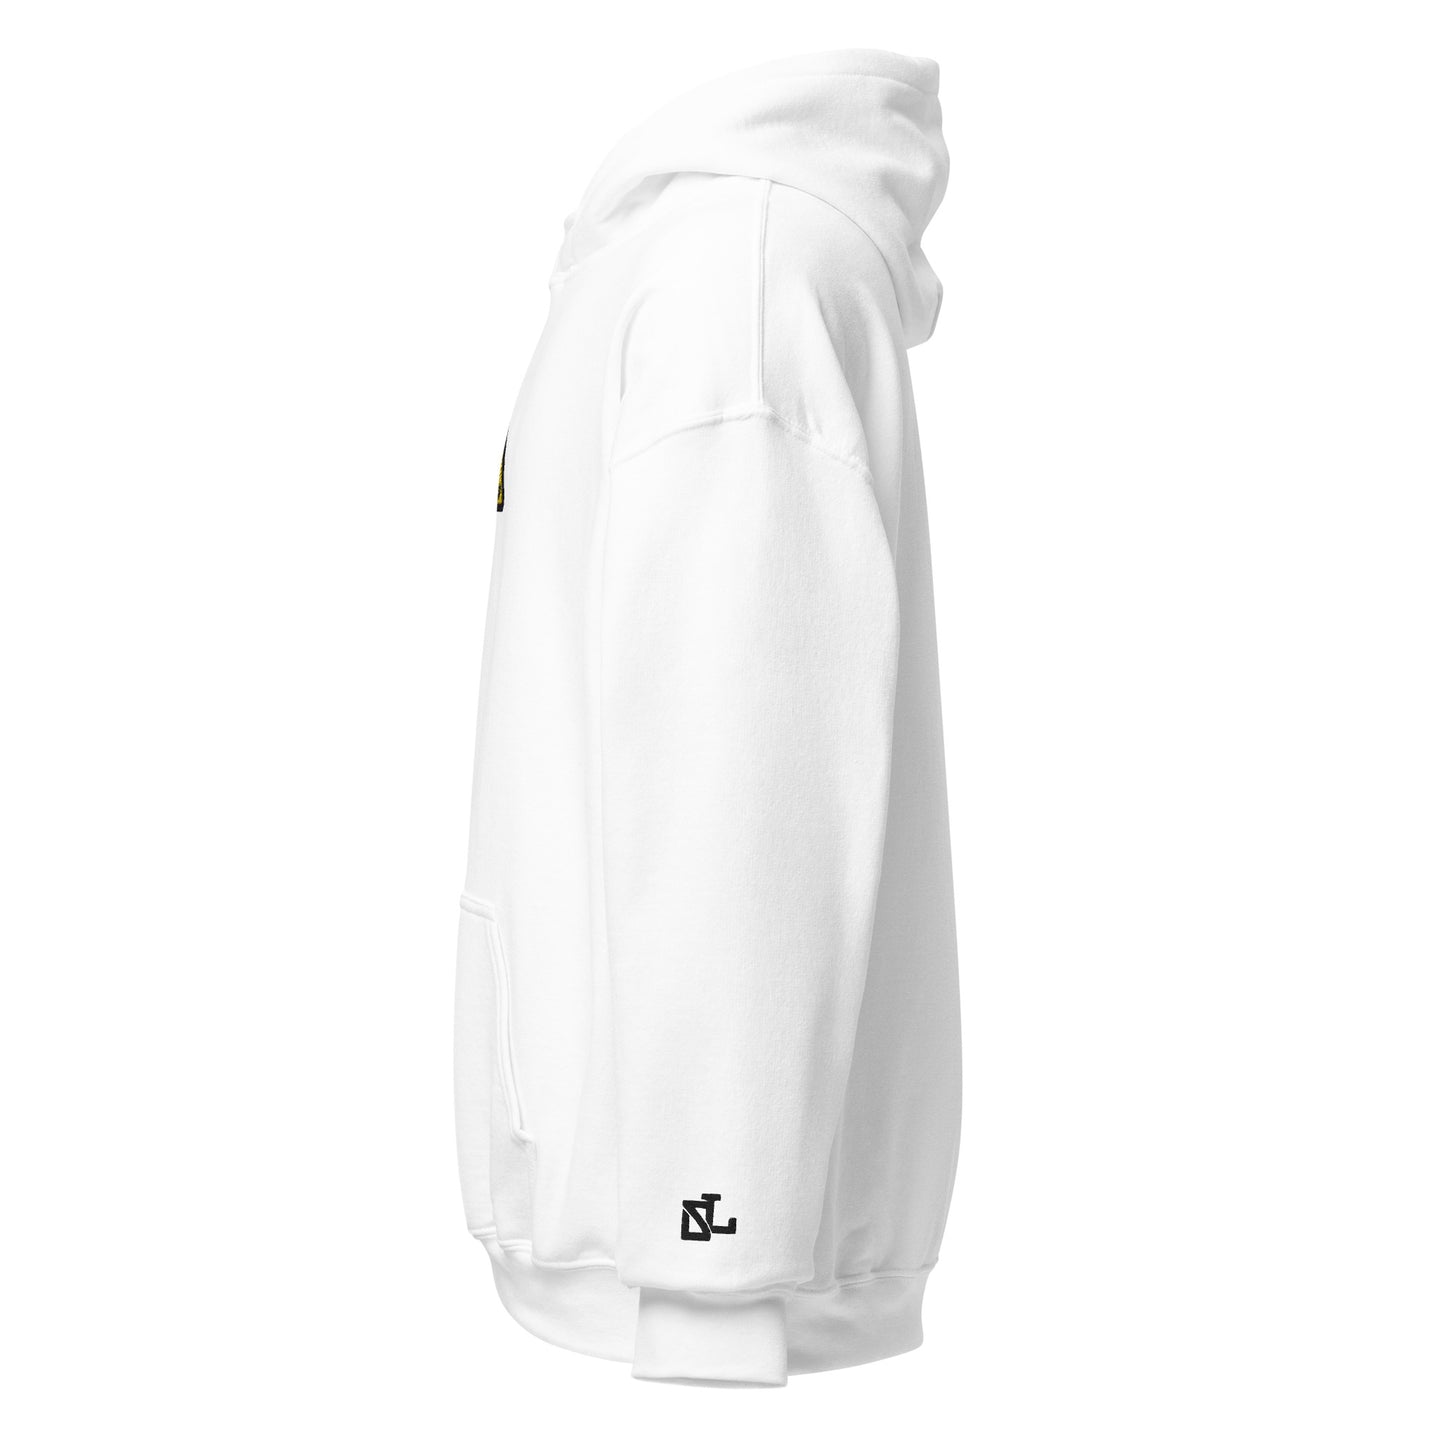 Only Way is Up hoodie WHITE